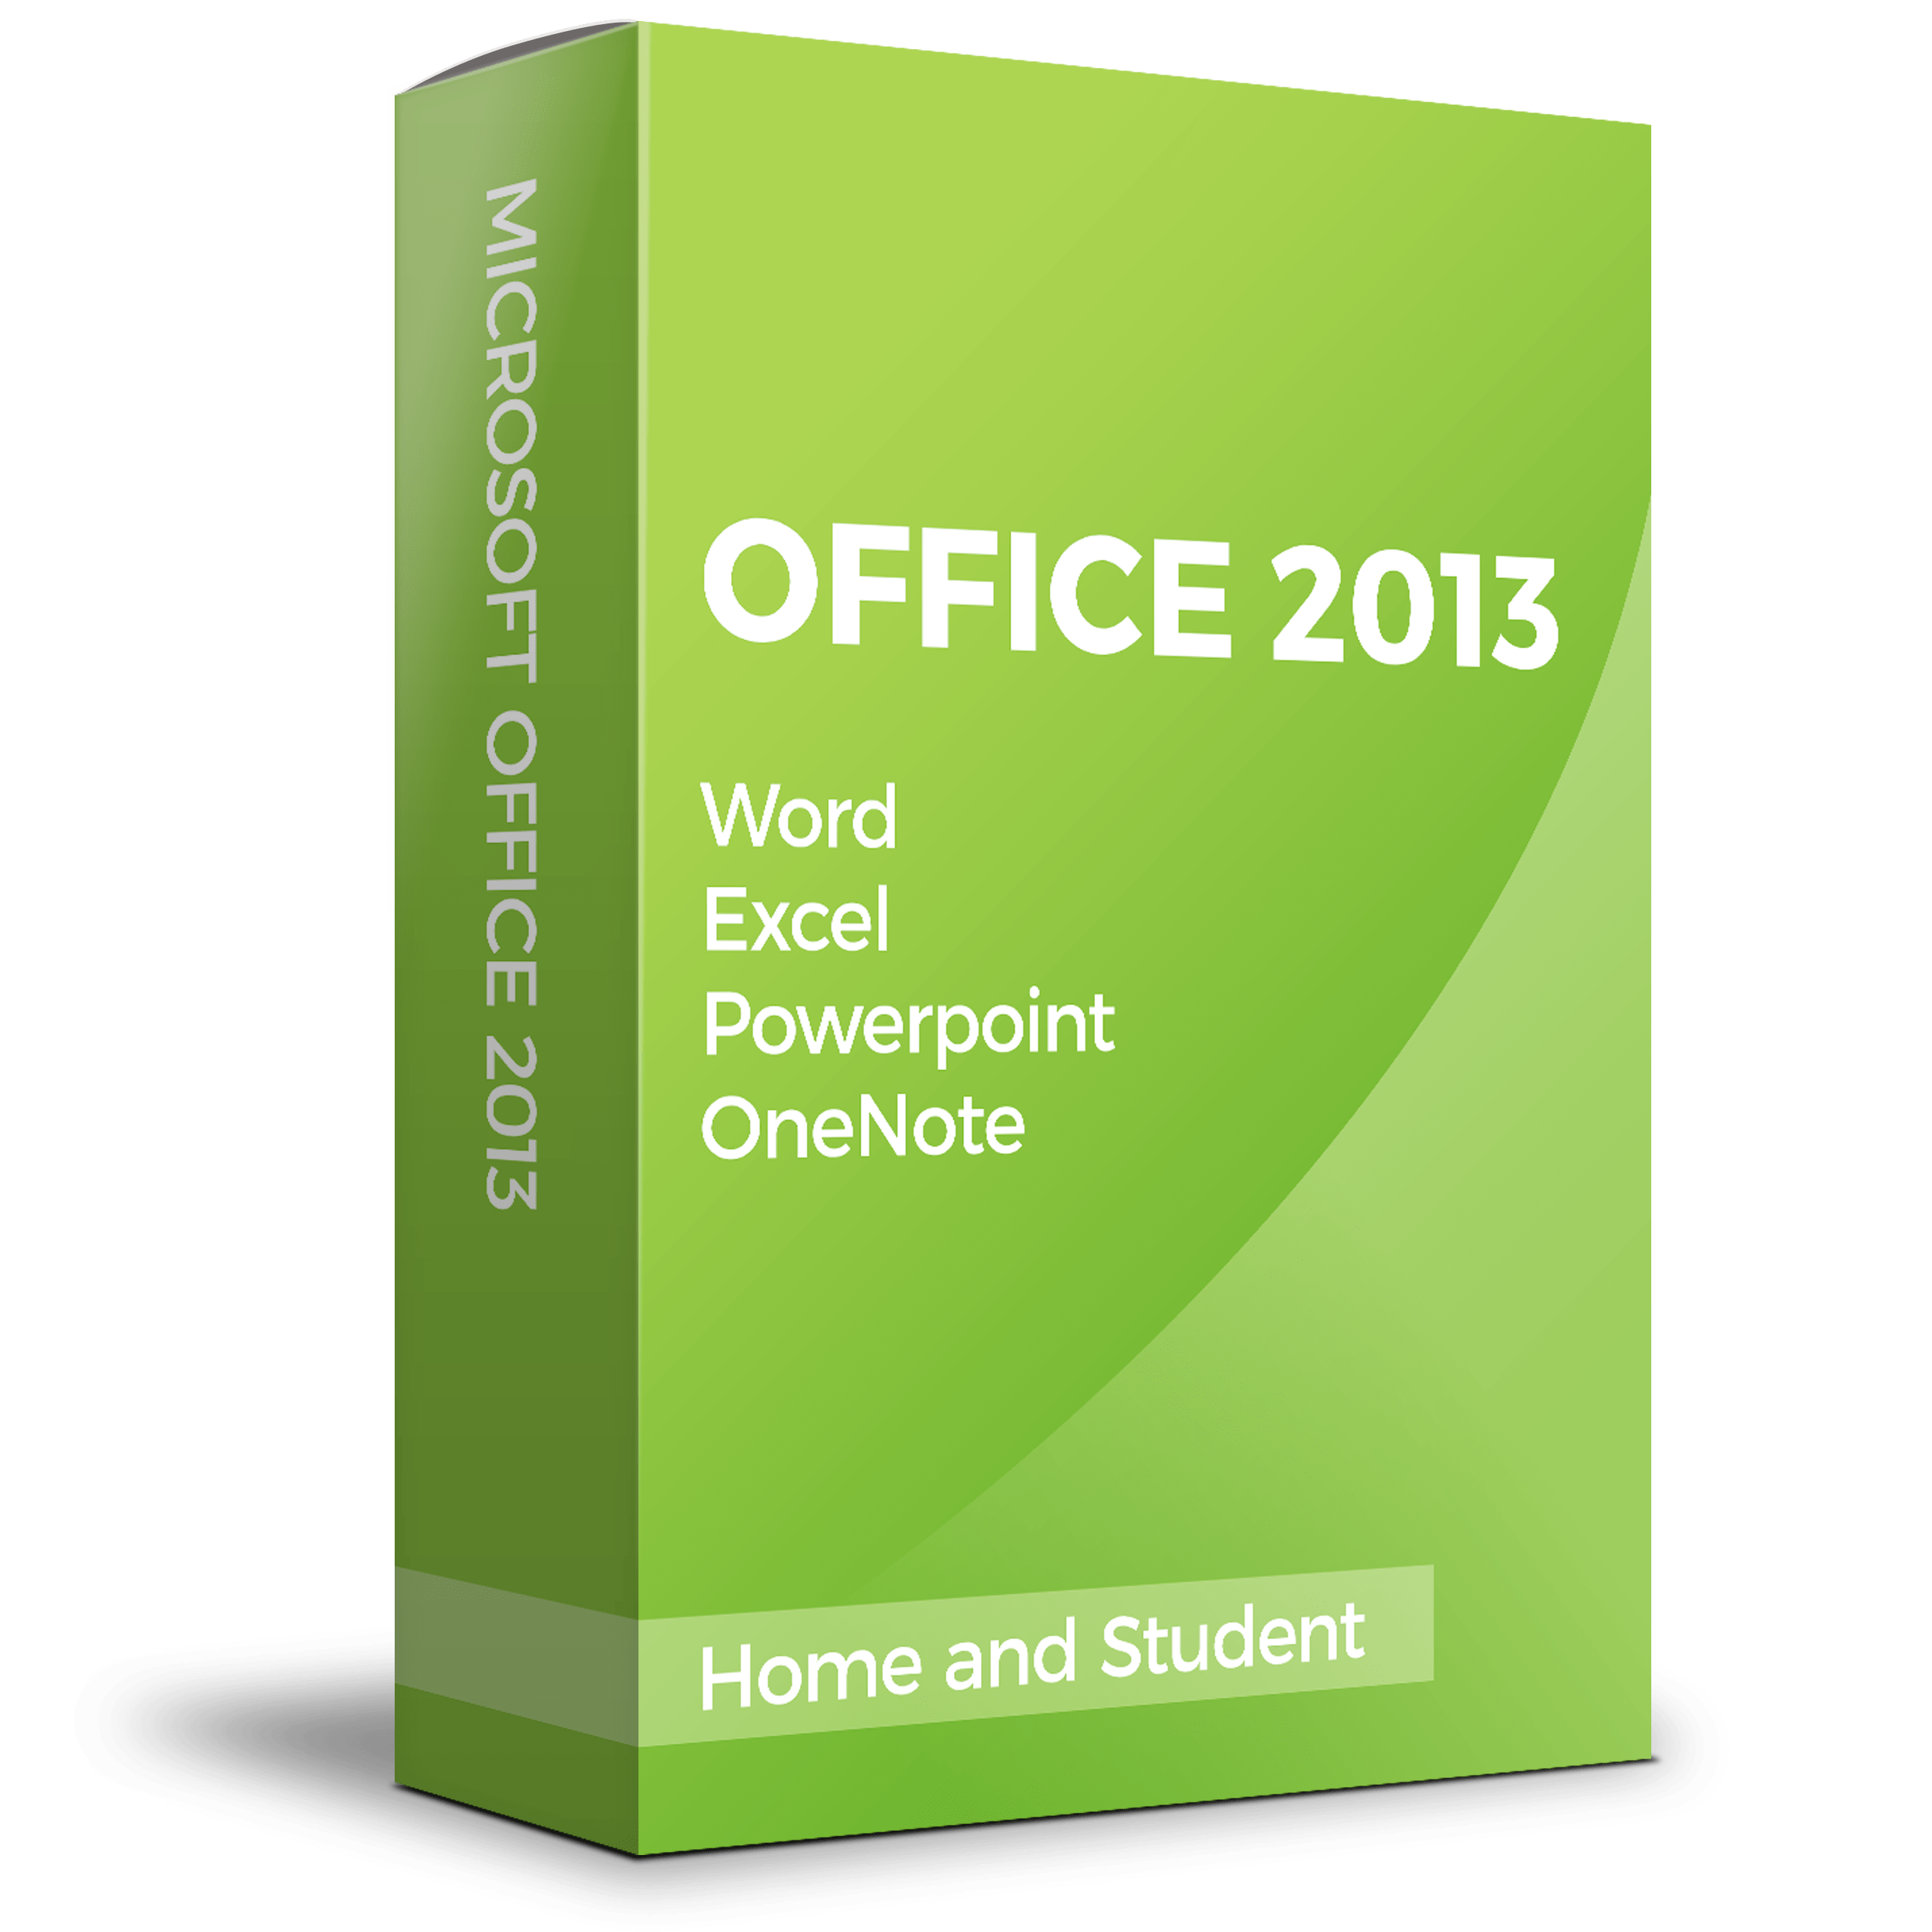 Office 2013 windows 10. Office 2013 Home and Business. Microsoft Office 2013 professional. Microsoft Office 2013 professional Plus. Office 2013 Home and student.